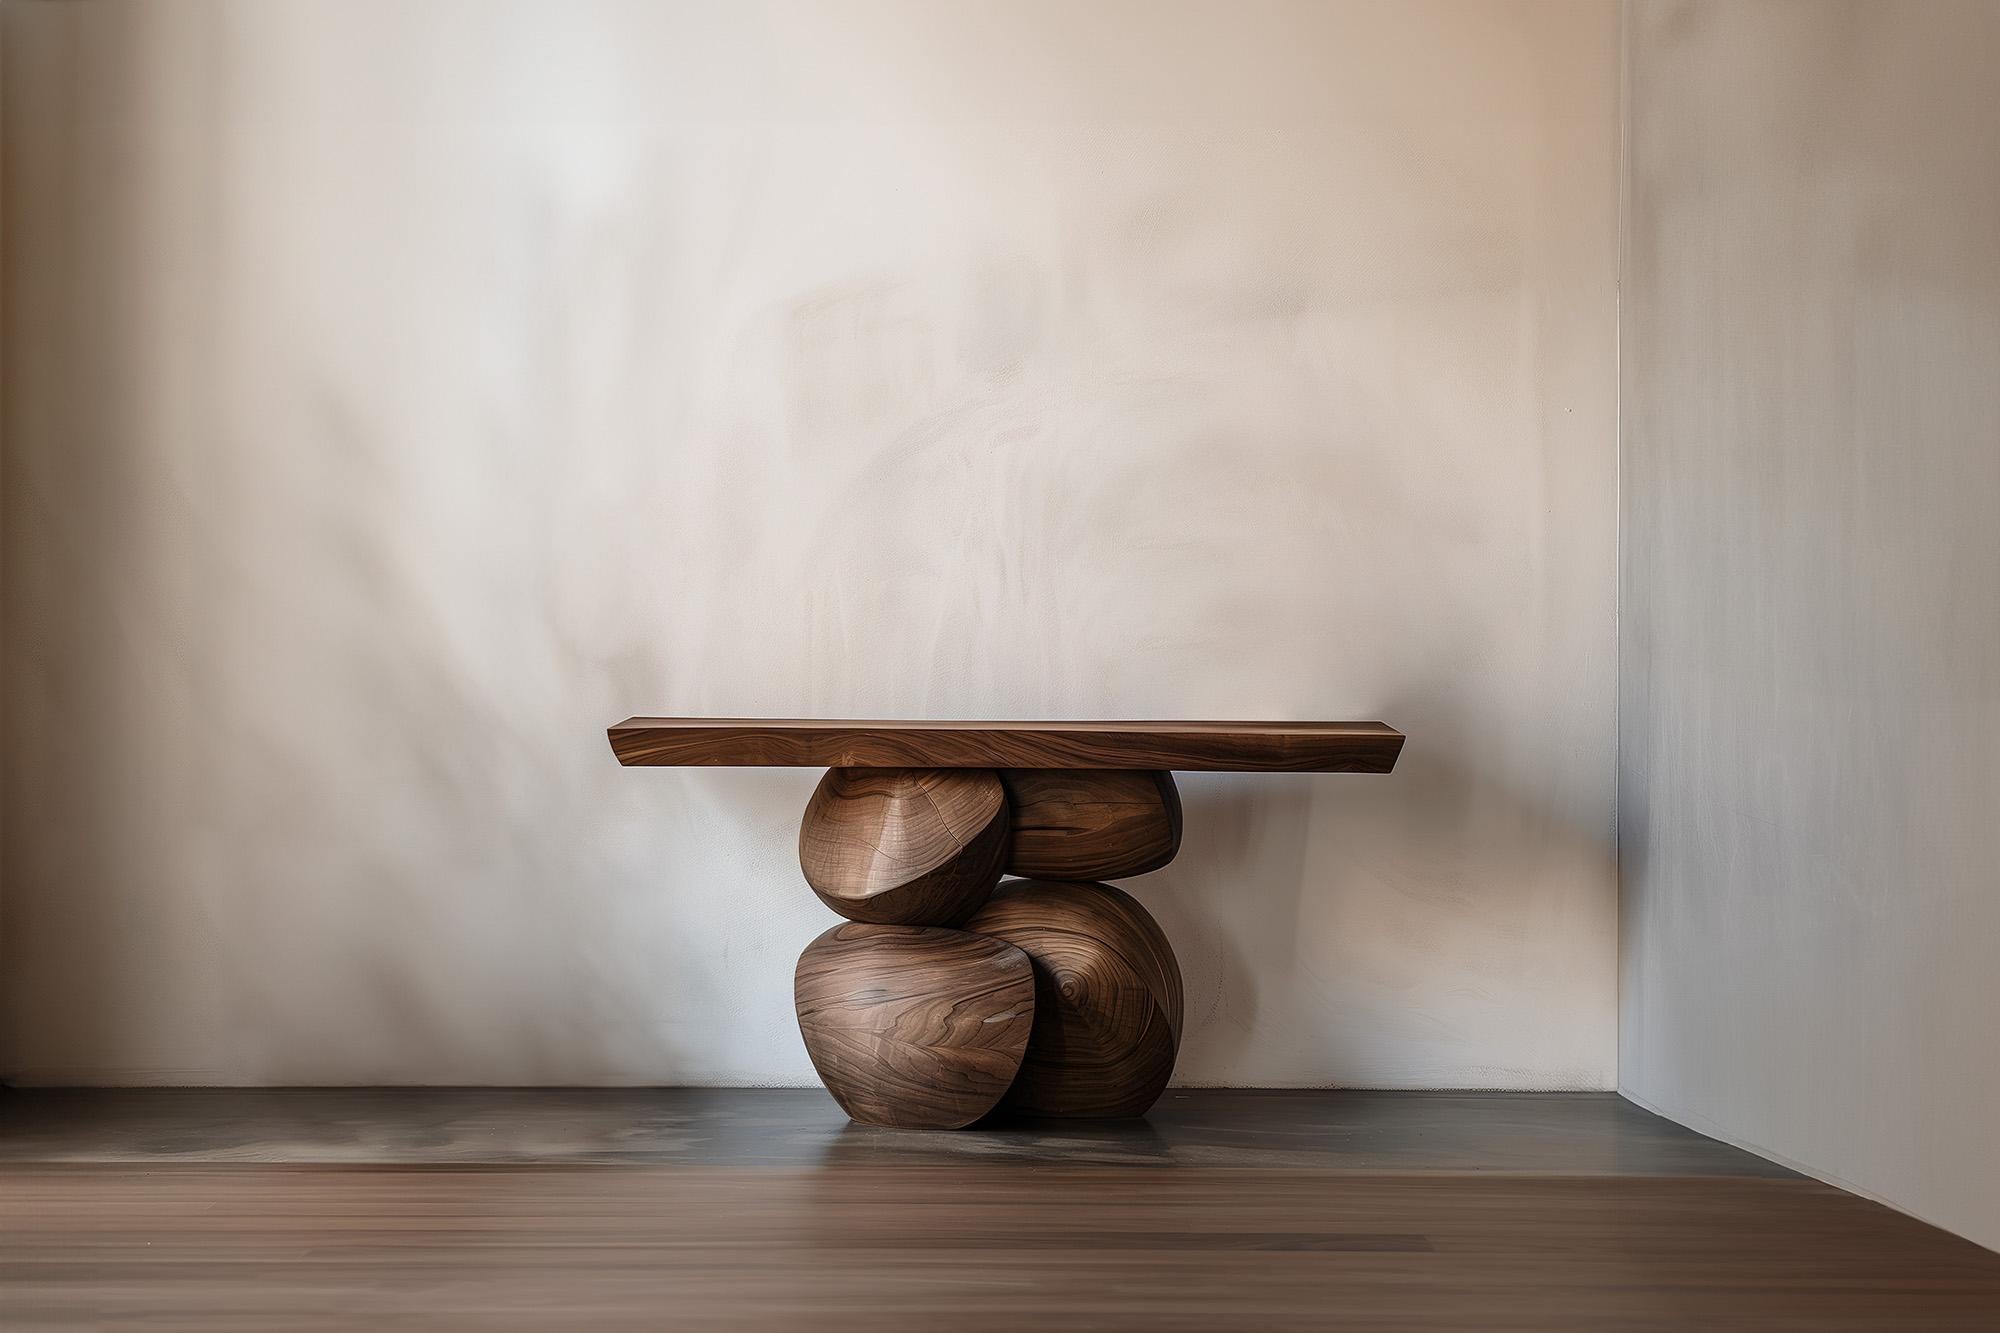 Elefante Console Table 25, Design by Joel Escalona, Artistic Wood
—————————————————————
Elefante Collection: A Harmony of Design and Heritage by NONO

Crafting Elegance with a Modernist Touch

NONO, renowned for its decade-long journey in redefining